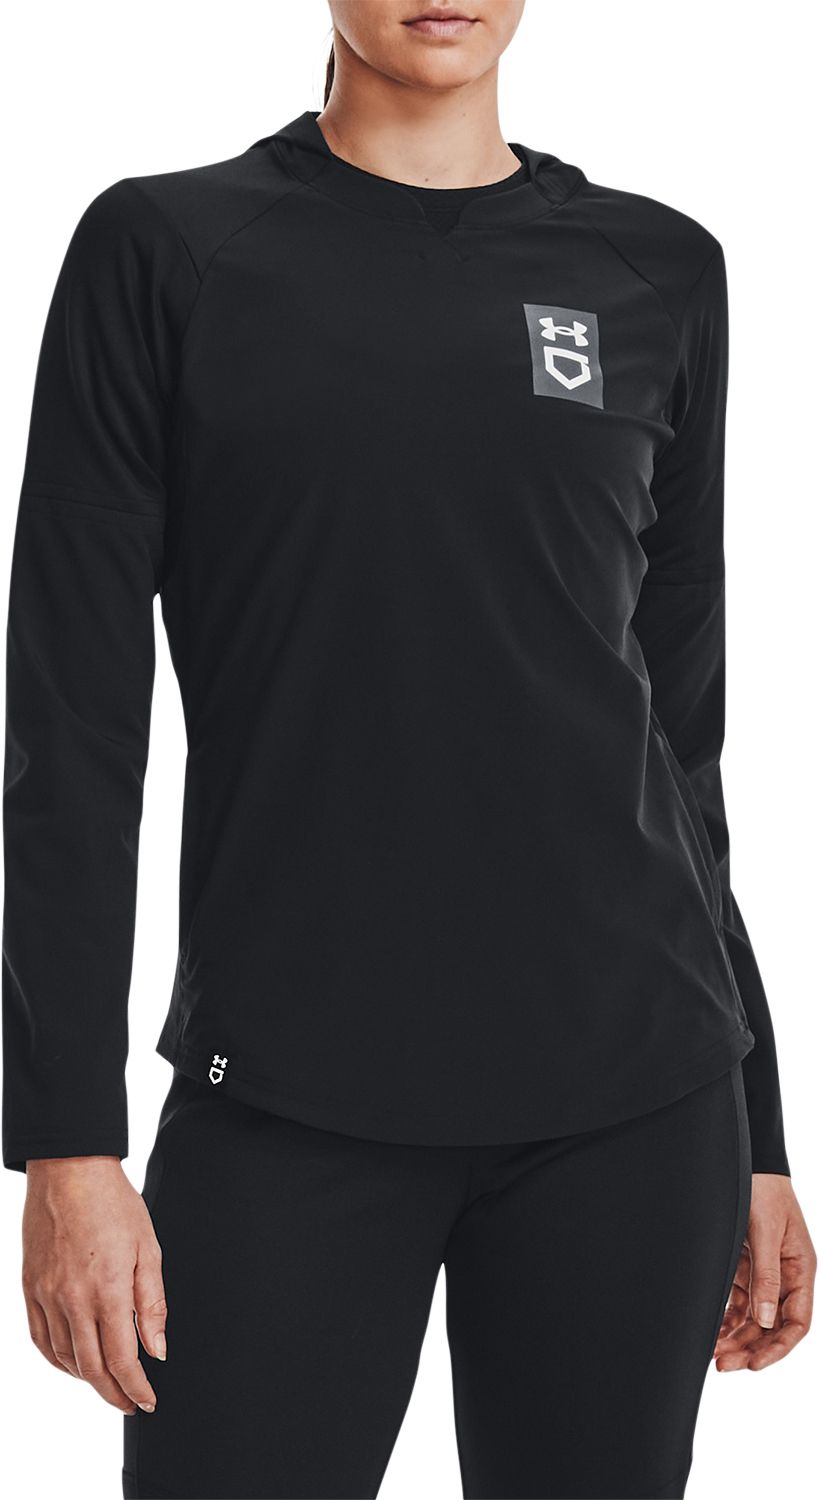 Under Armour Women's Softball Cage Jacket